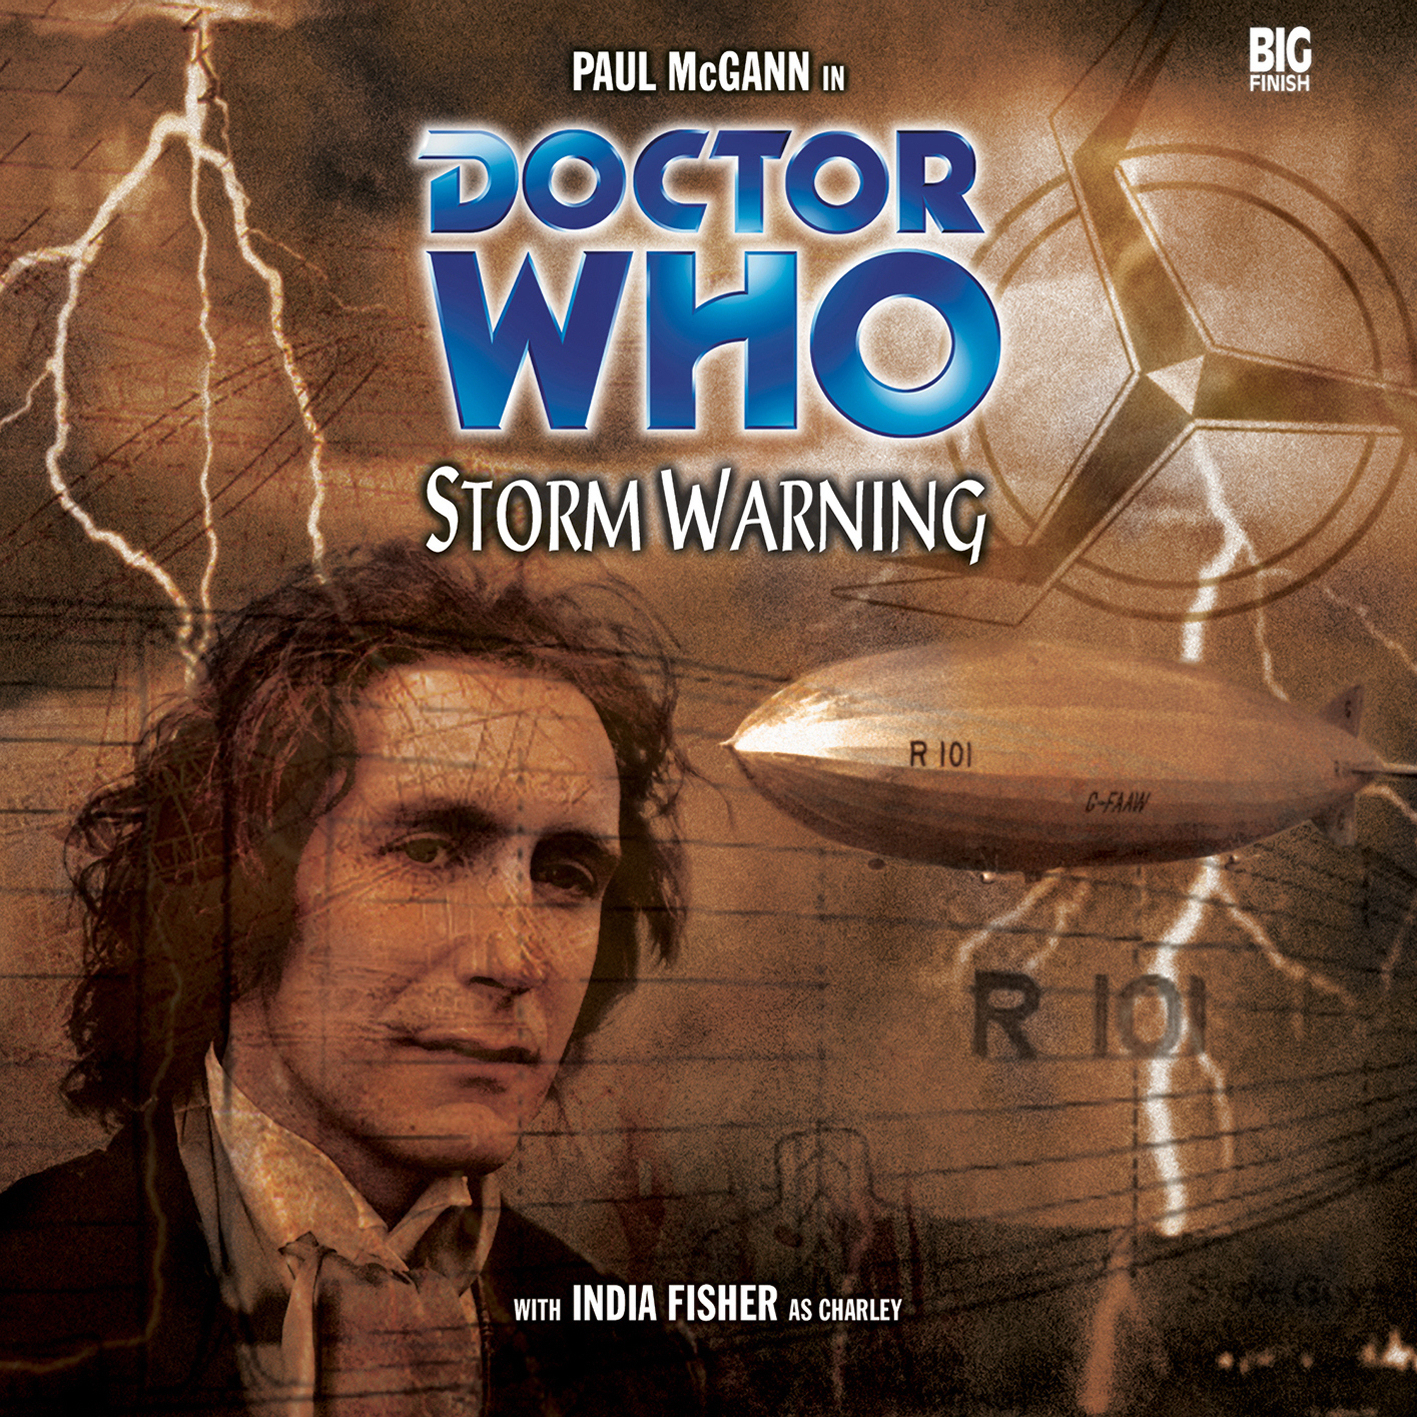 Cover image for Storm Warning: the Eighth Doctor (Paul McGann)'s face superimposed in front of plans for a blimp labeled R101. Also visible is the blimp itself, lightning, and a simplified triskelion. The image is sepia in tone. Text reads: Paul McGann in DOCTOR WHO; Storm Warning; with India Fisher as Charley'.